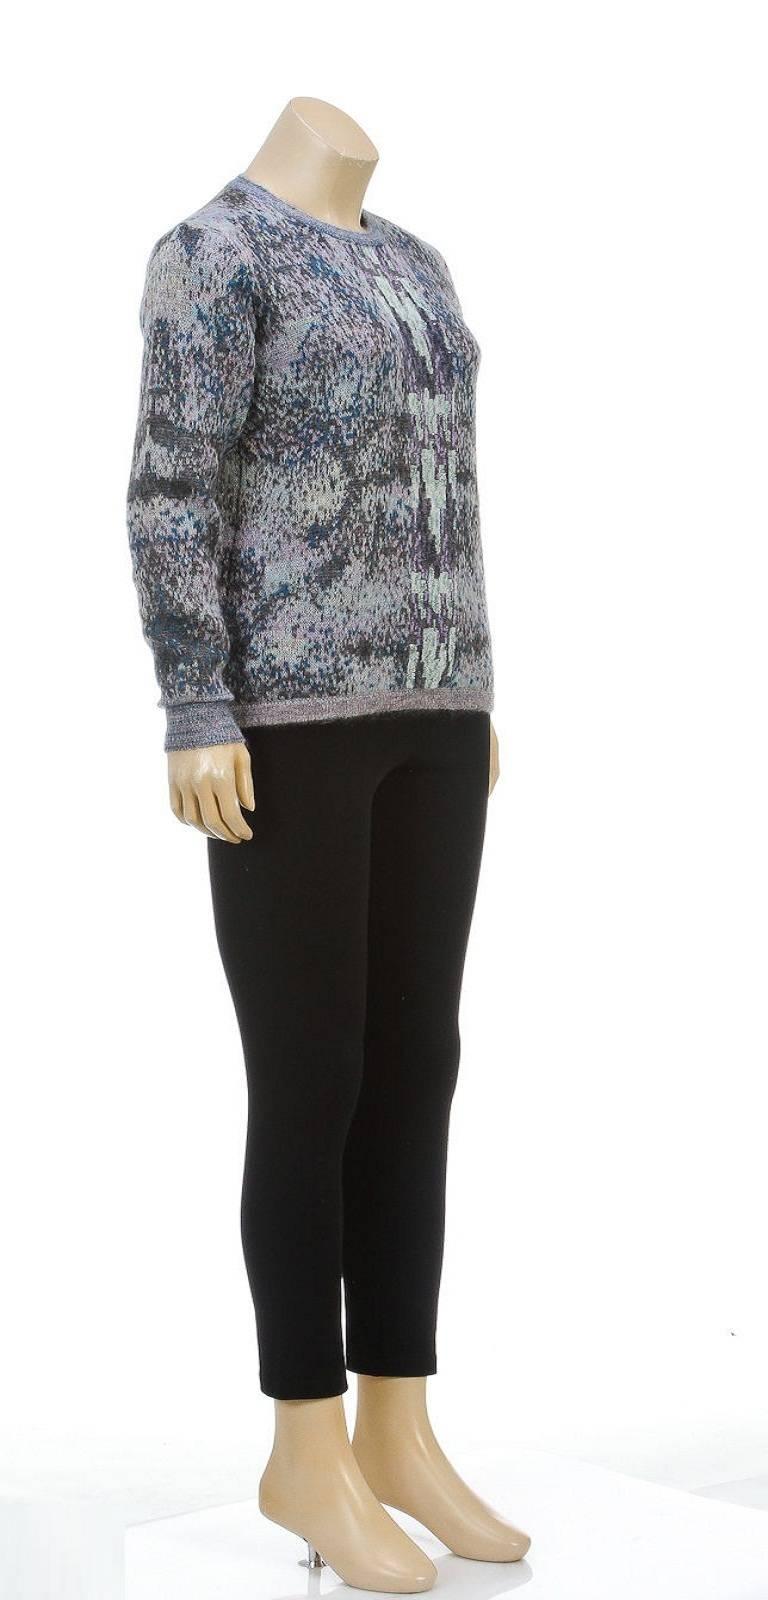 Chanel Gray Multicolor Long Sleeve Sequin Sweater (Size 36) In Good Condition For Sale In Corona Del Mar, CA